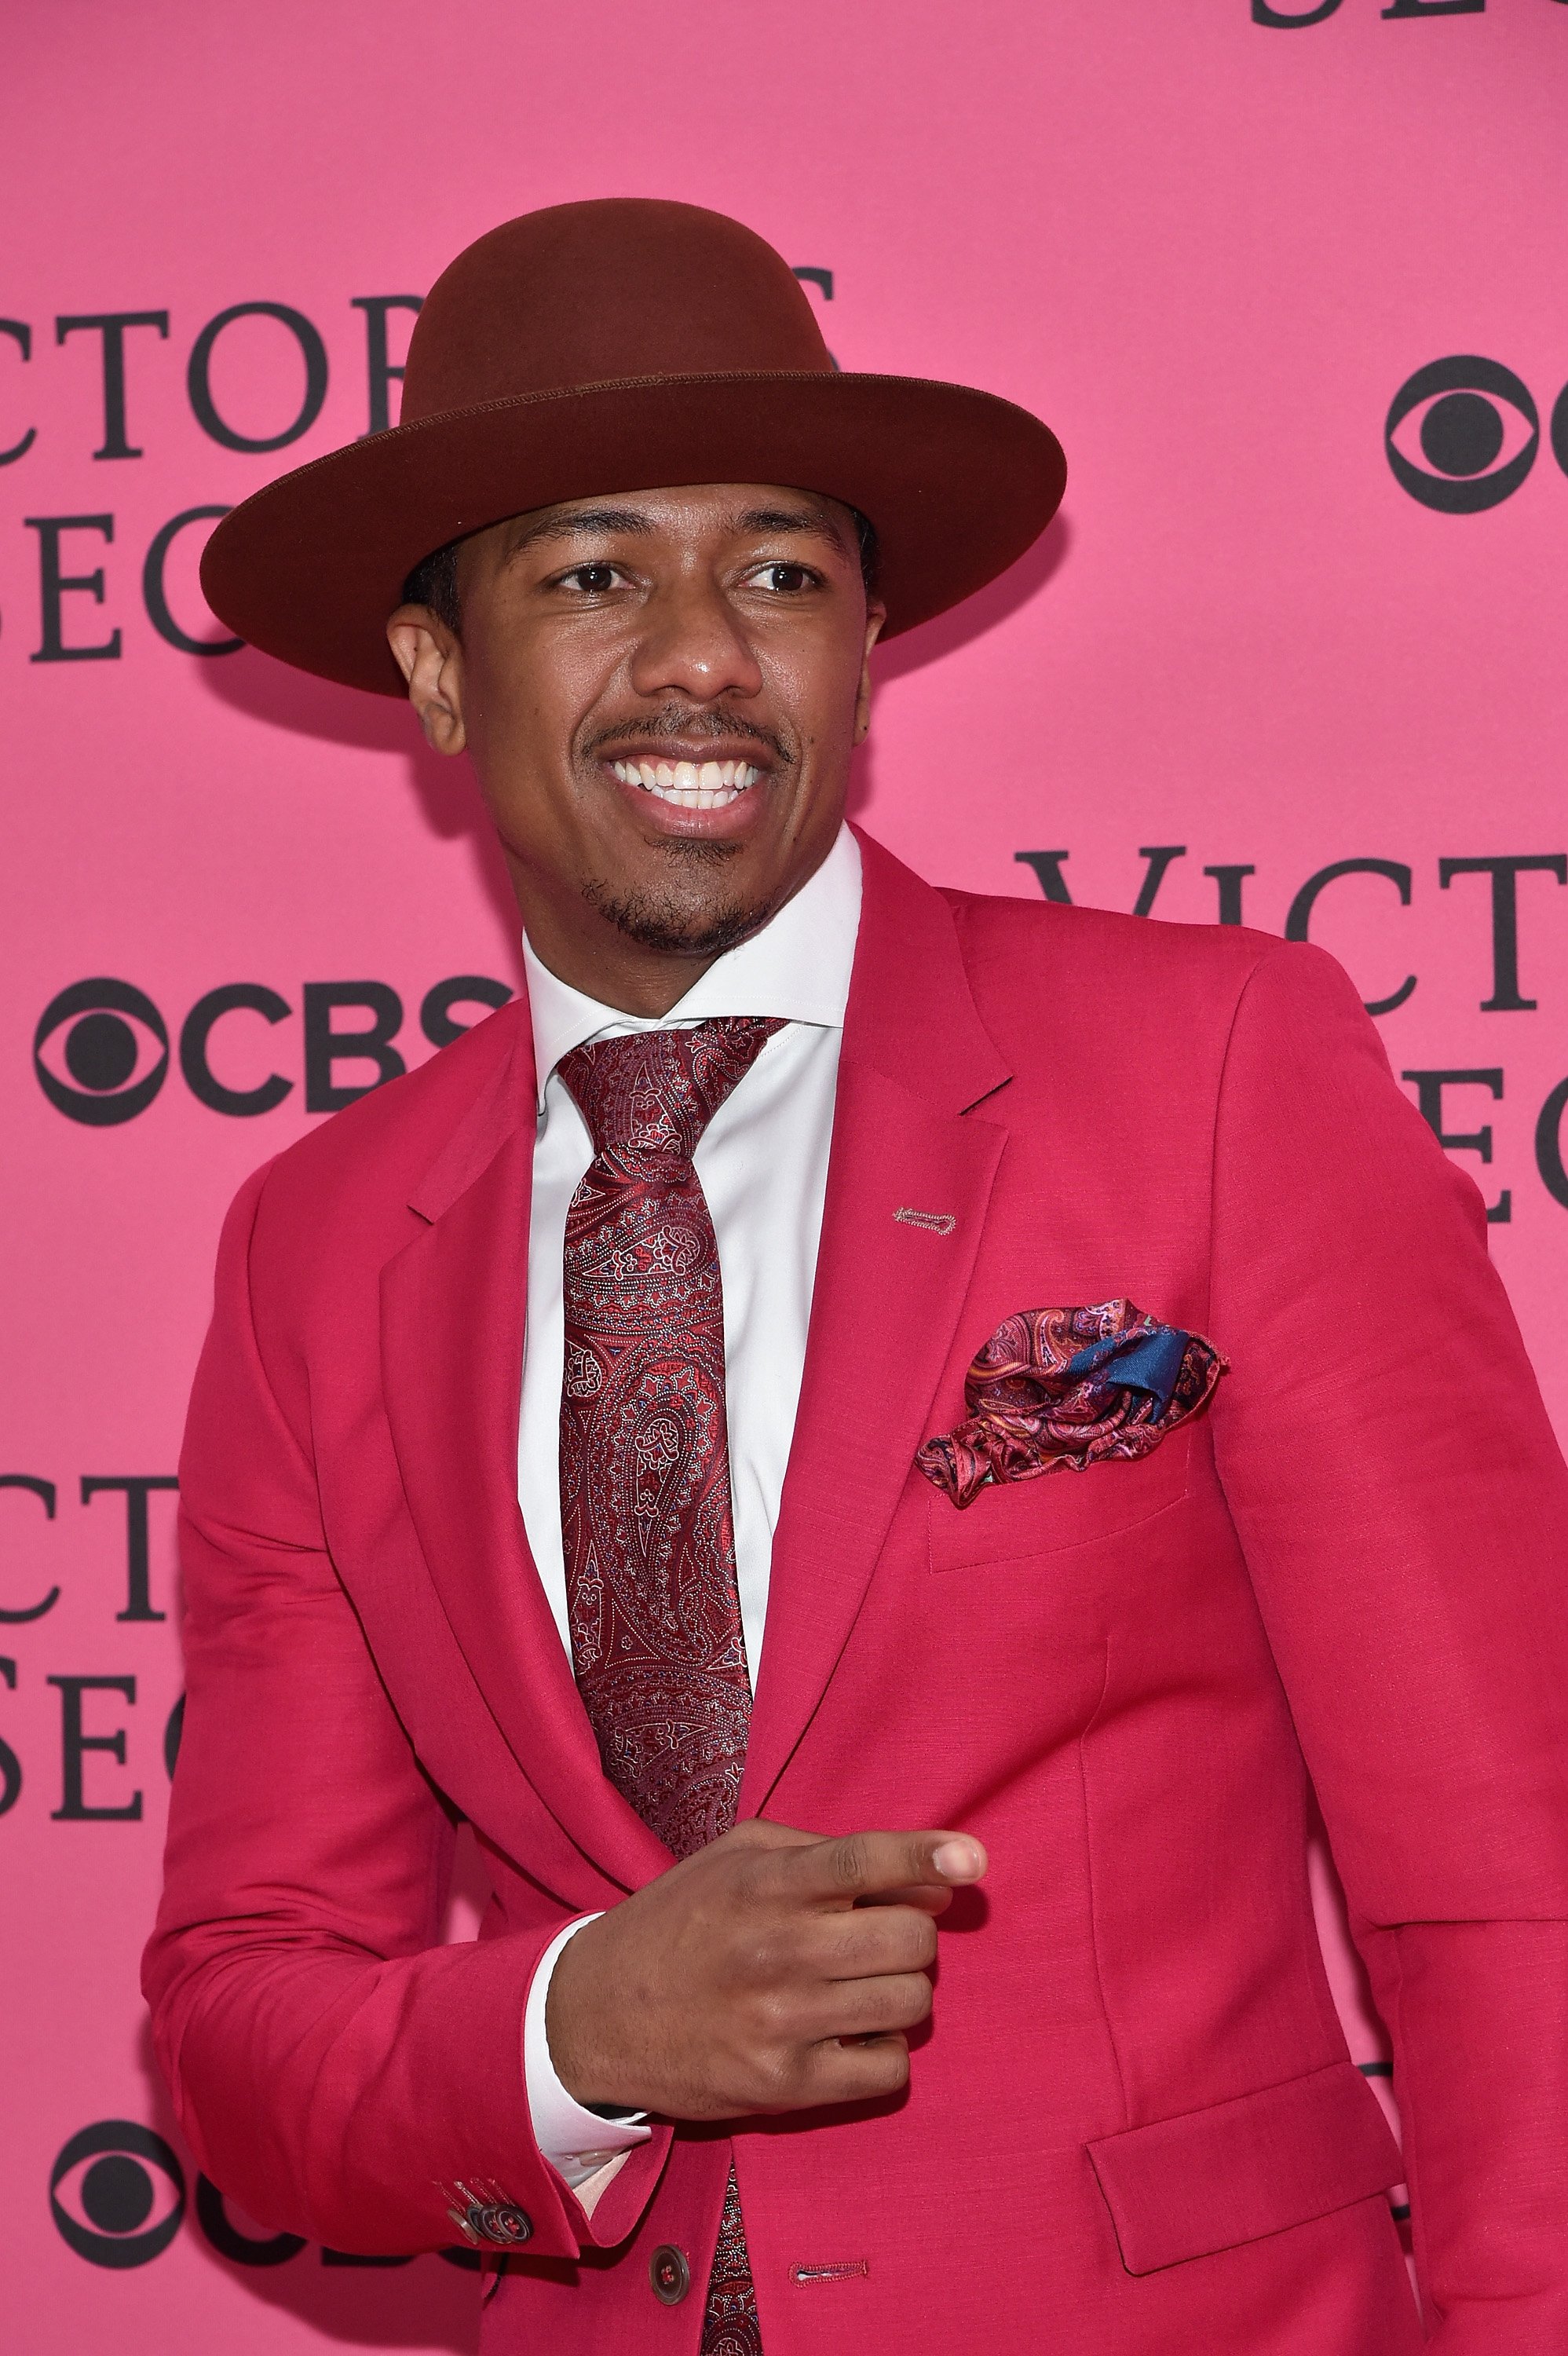 Nick Cannon poses at the 2015 Victoria's Secret Fashion Show on November 10, 2015 in New York City | Photo: Getty Images